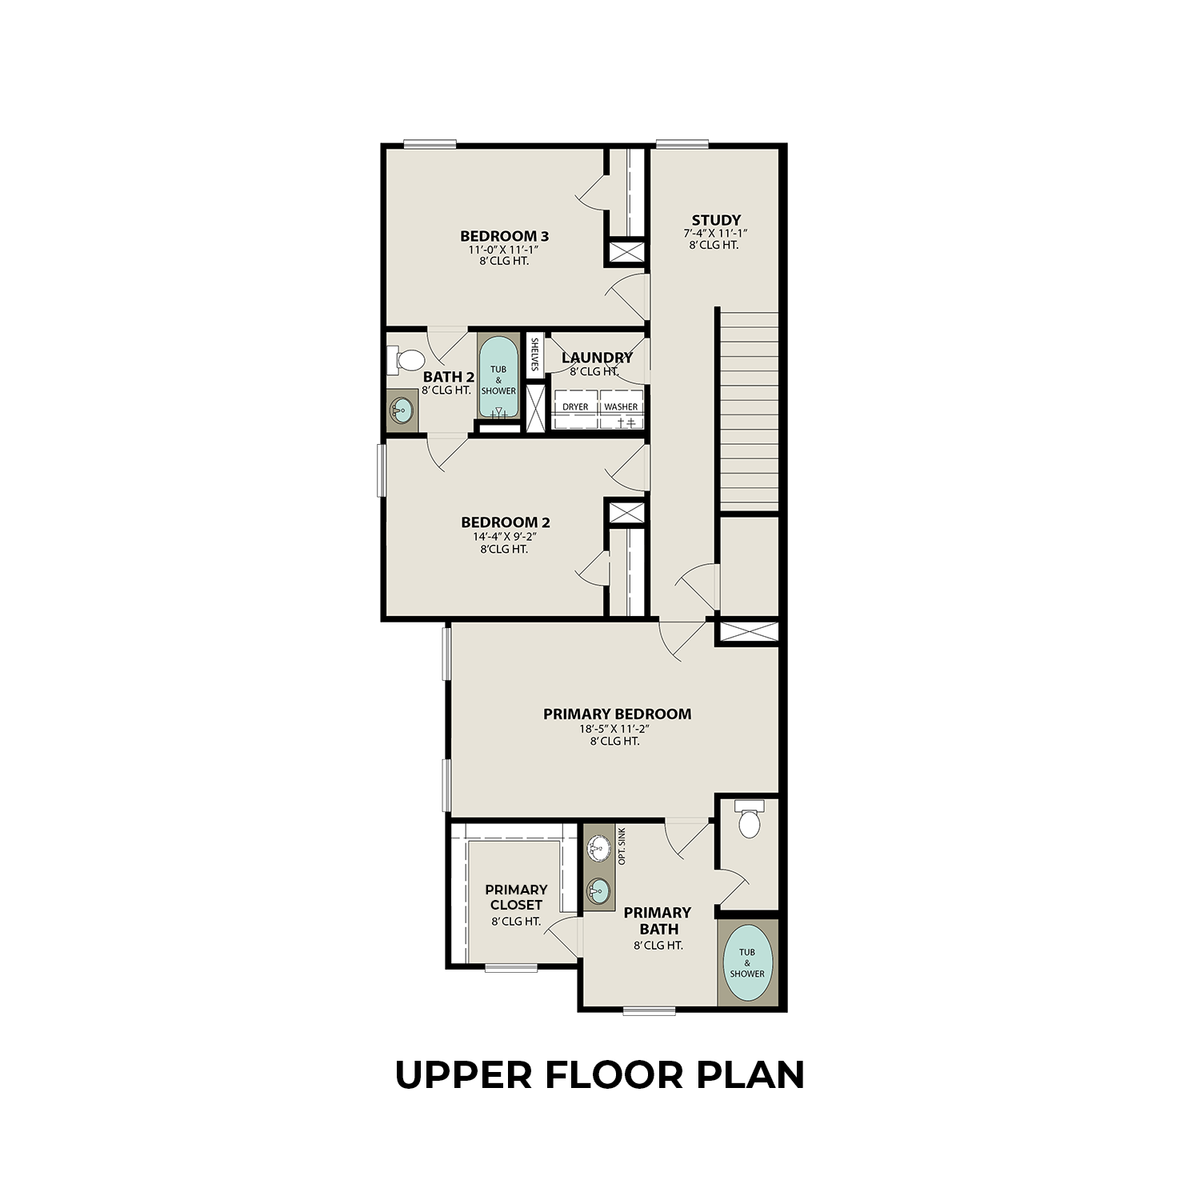 2 - The Lily B floor plan layout for 5235 Shallowhurst Lane in Davidson Homes' Haven at Kieth Harrow community.